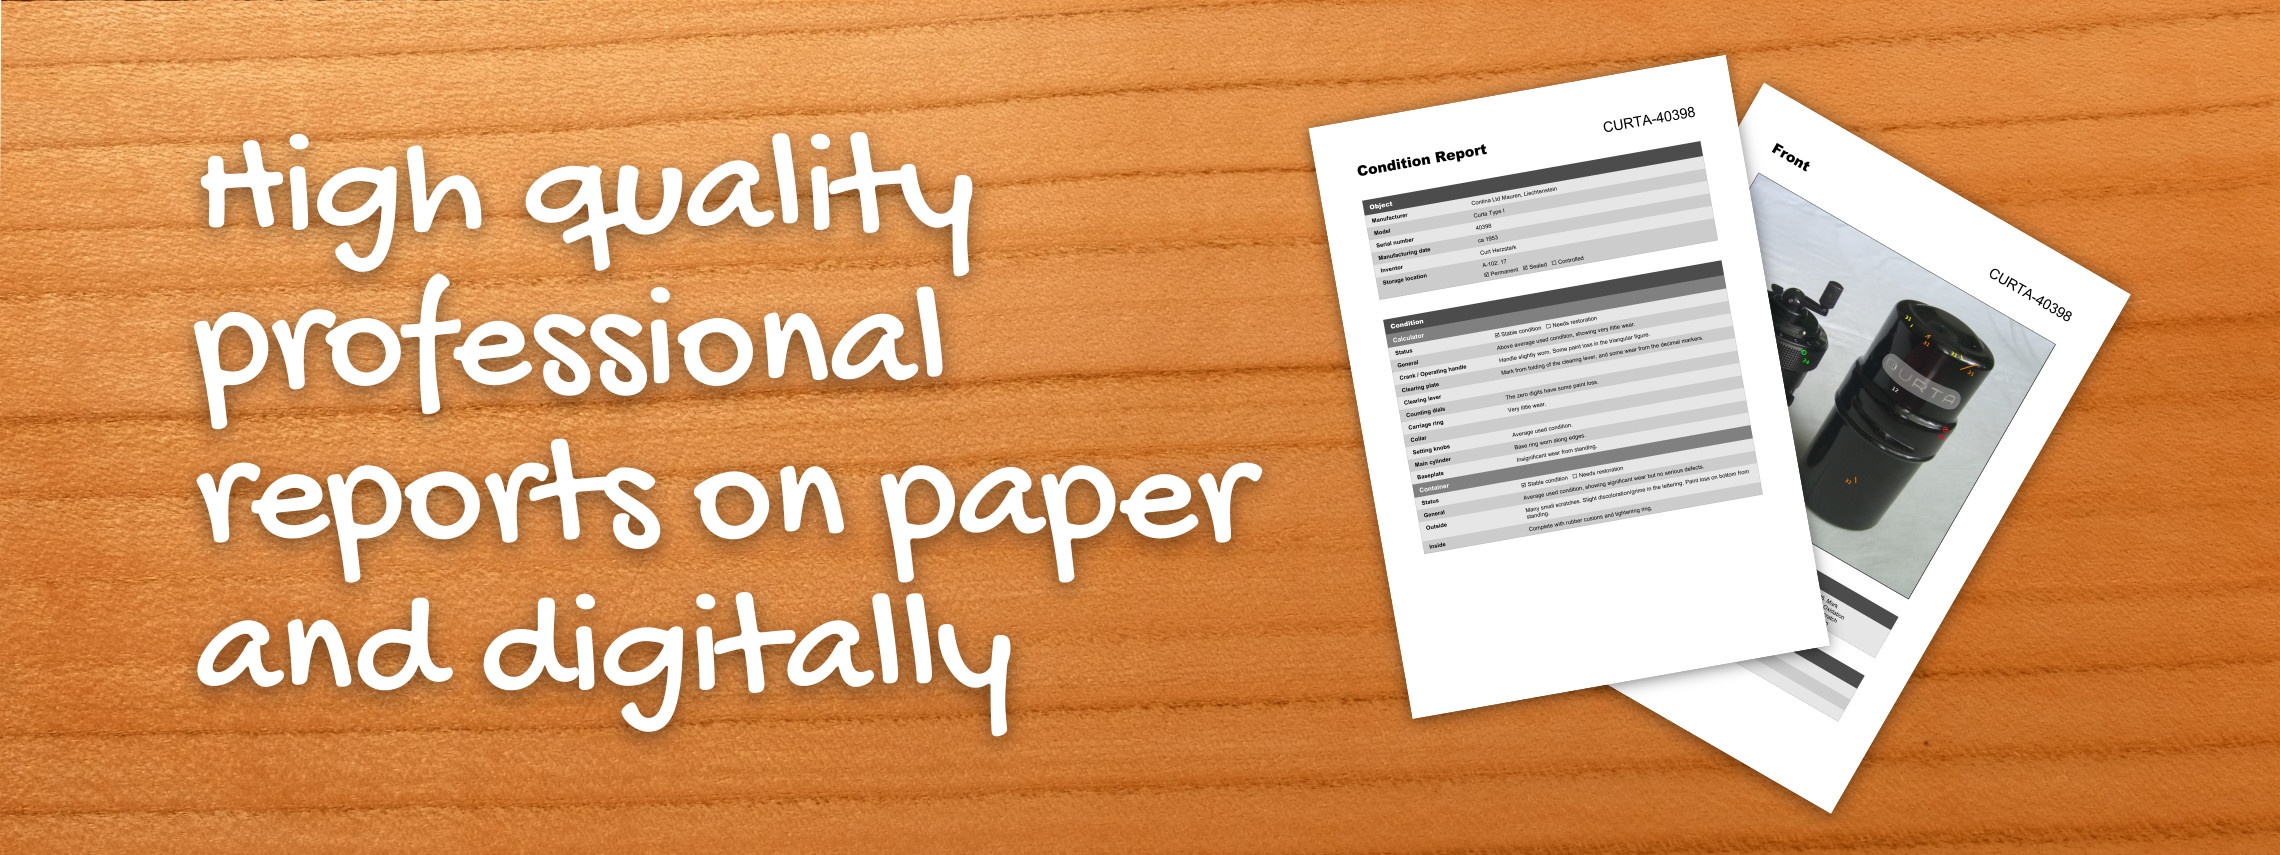 High quality professional reports on paper and digitally.